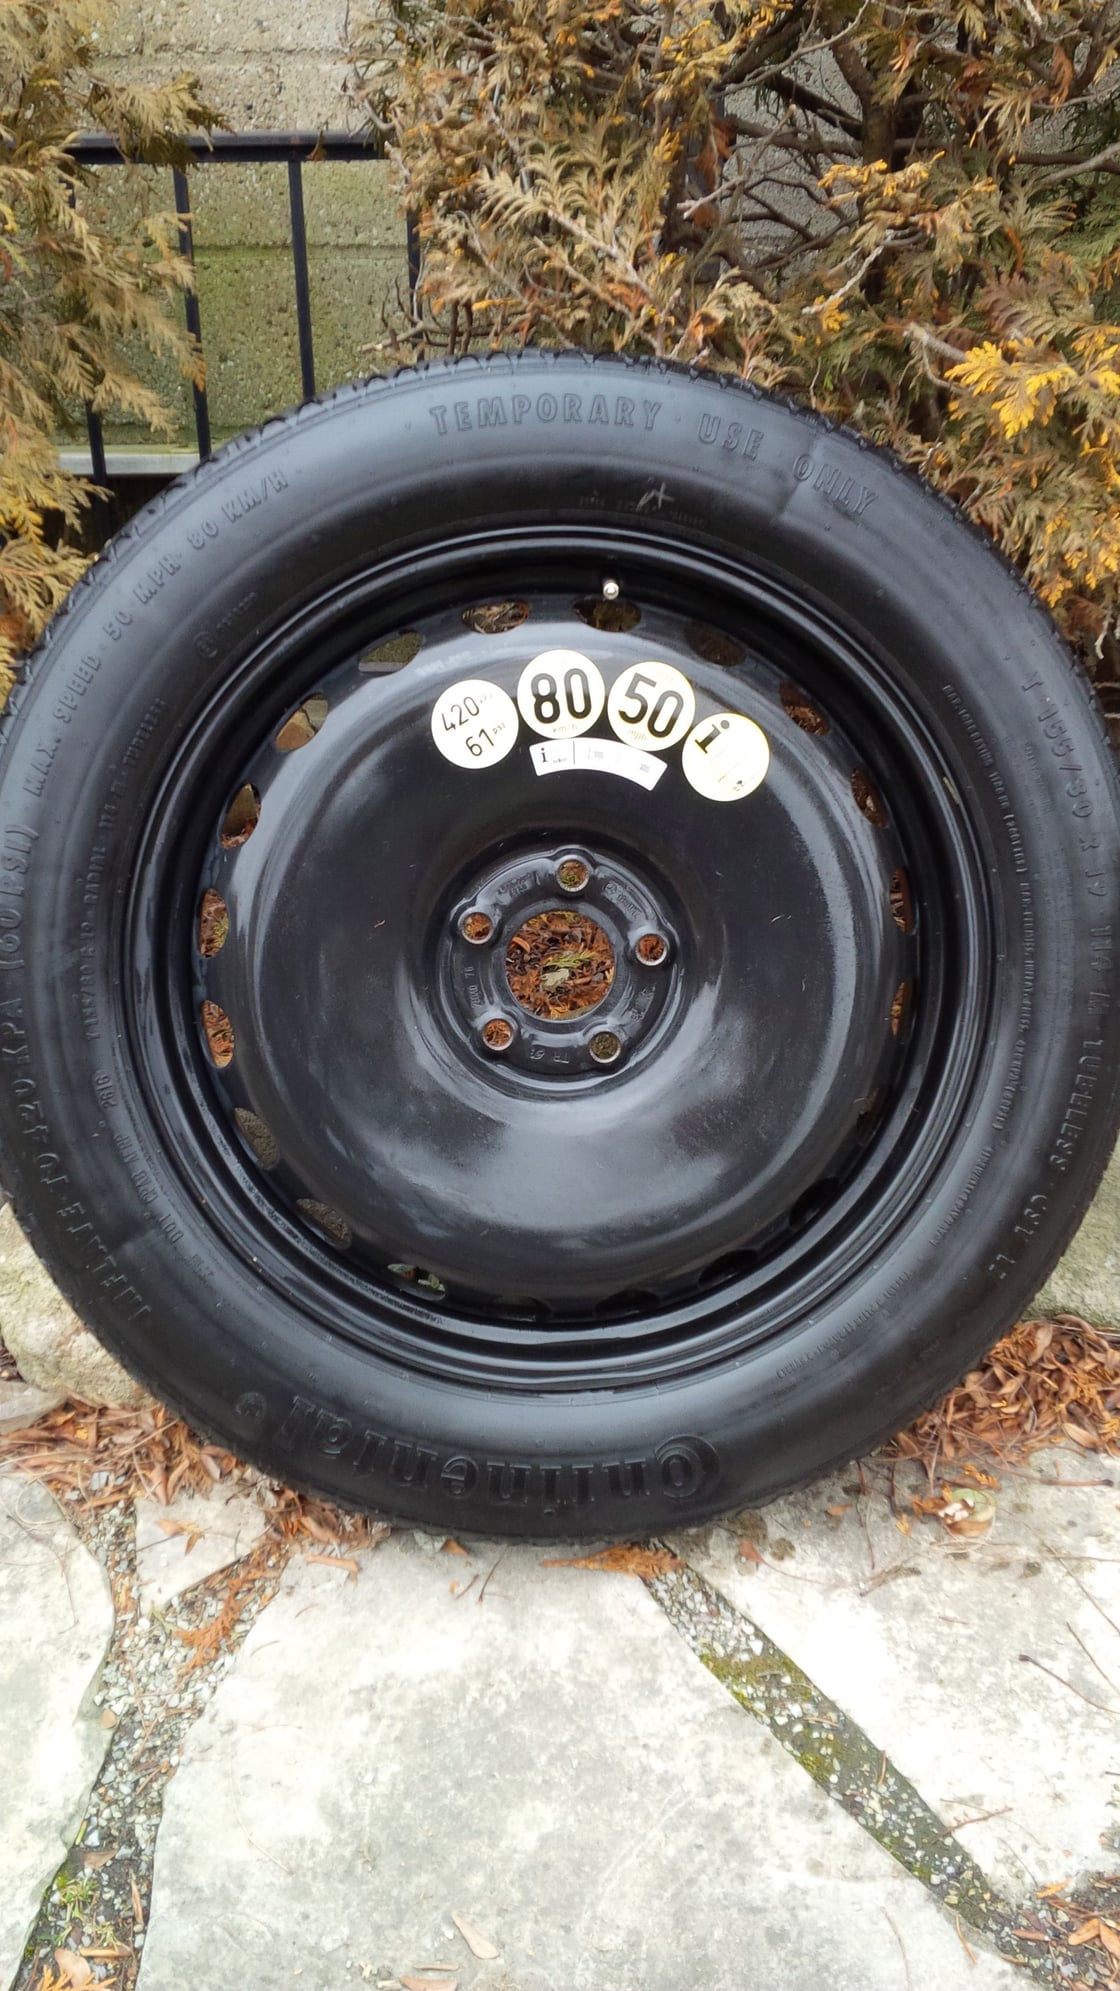 Wheels and Tires/Axles - MERCEDES Spare wheel and tire 155/80/19  28.76" diameter - Used - 2010 to 2016 Mercedes-Benz All Models - Detroit, MI 48038, United States